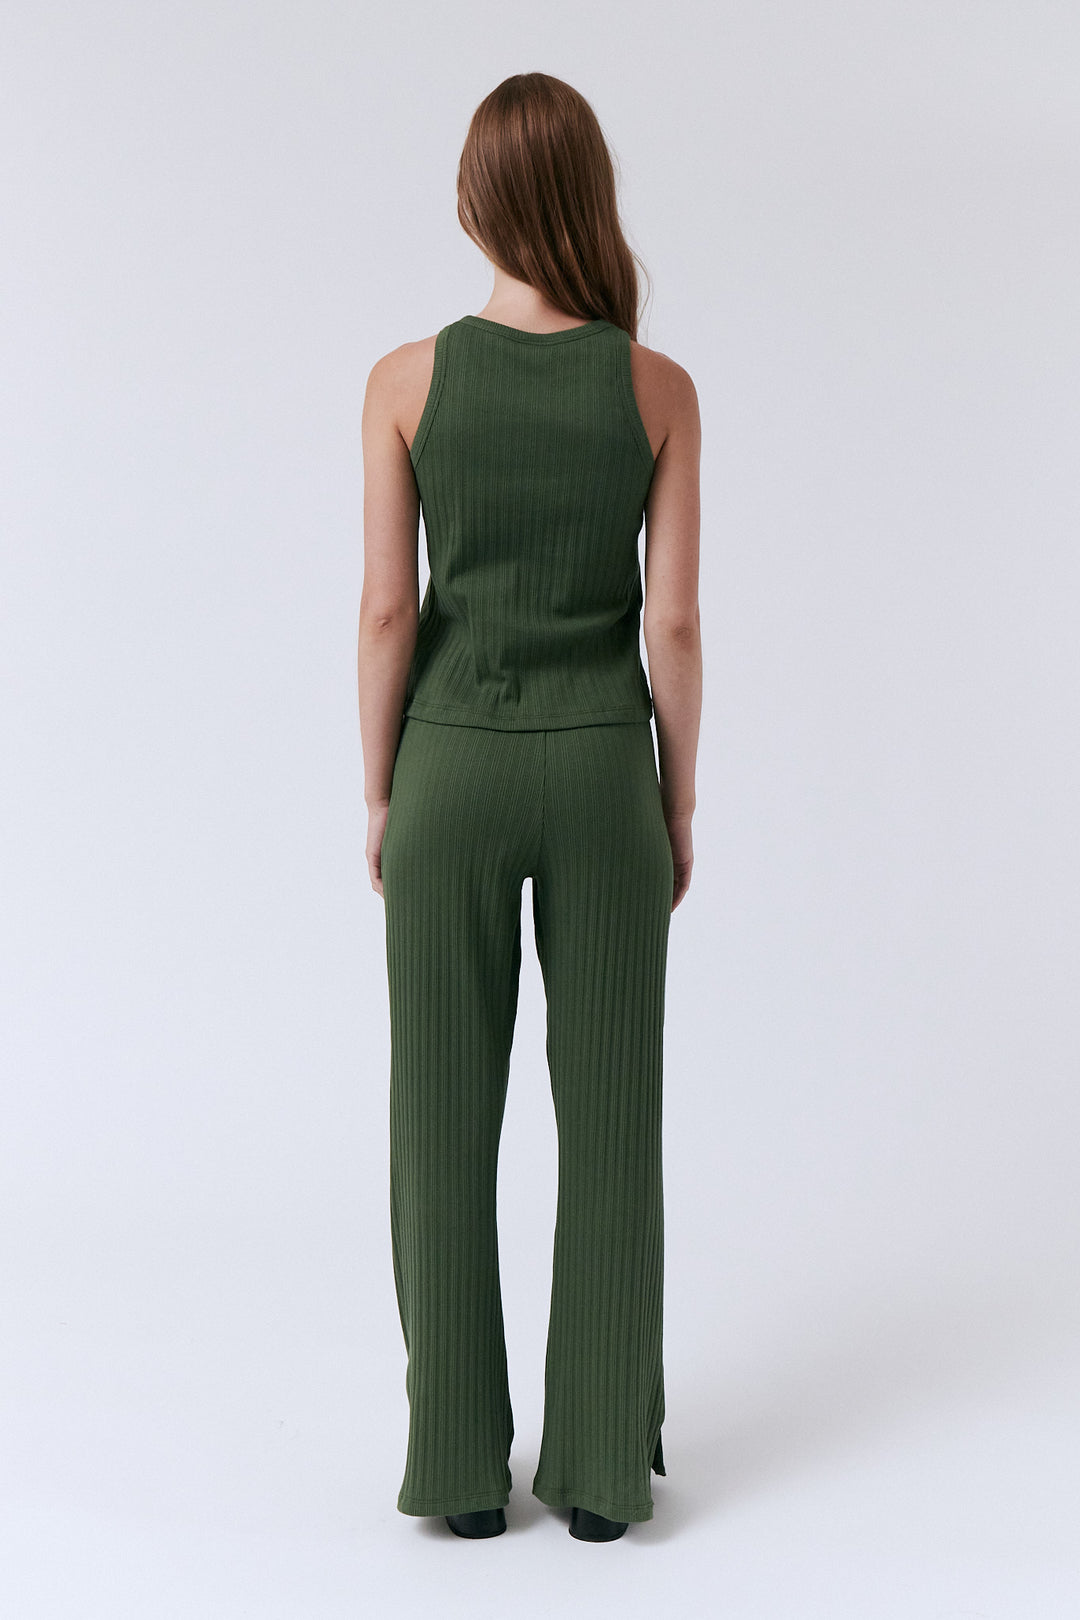 Ribbed pants with elastic waistband. Feature a small slit that provides extra comfort and enhances leg silhouette. 96% organic cotton 4% elastane - Sustainably made in Spain